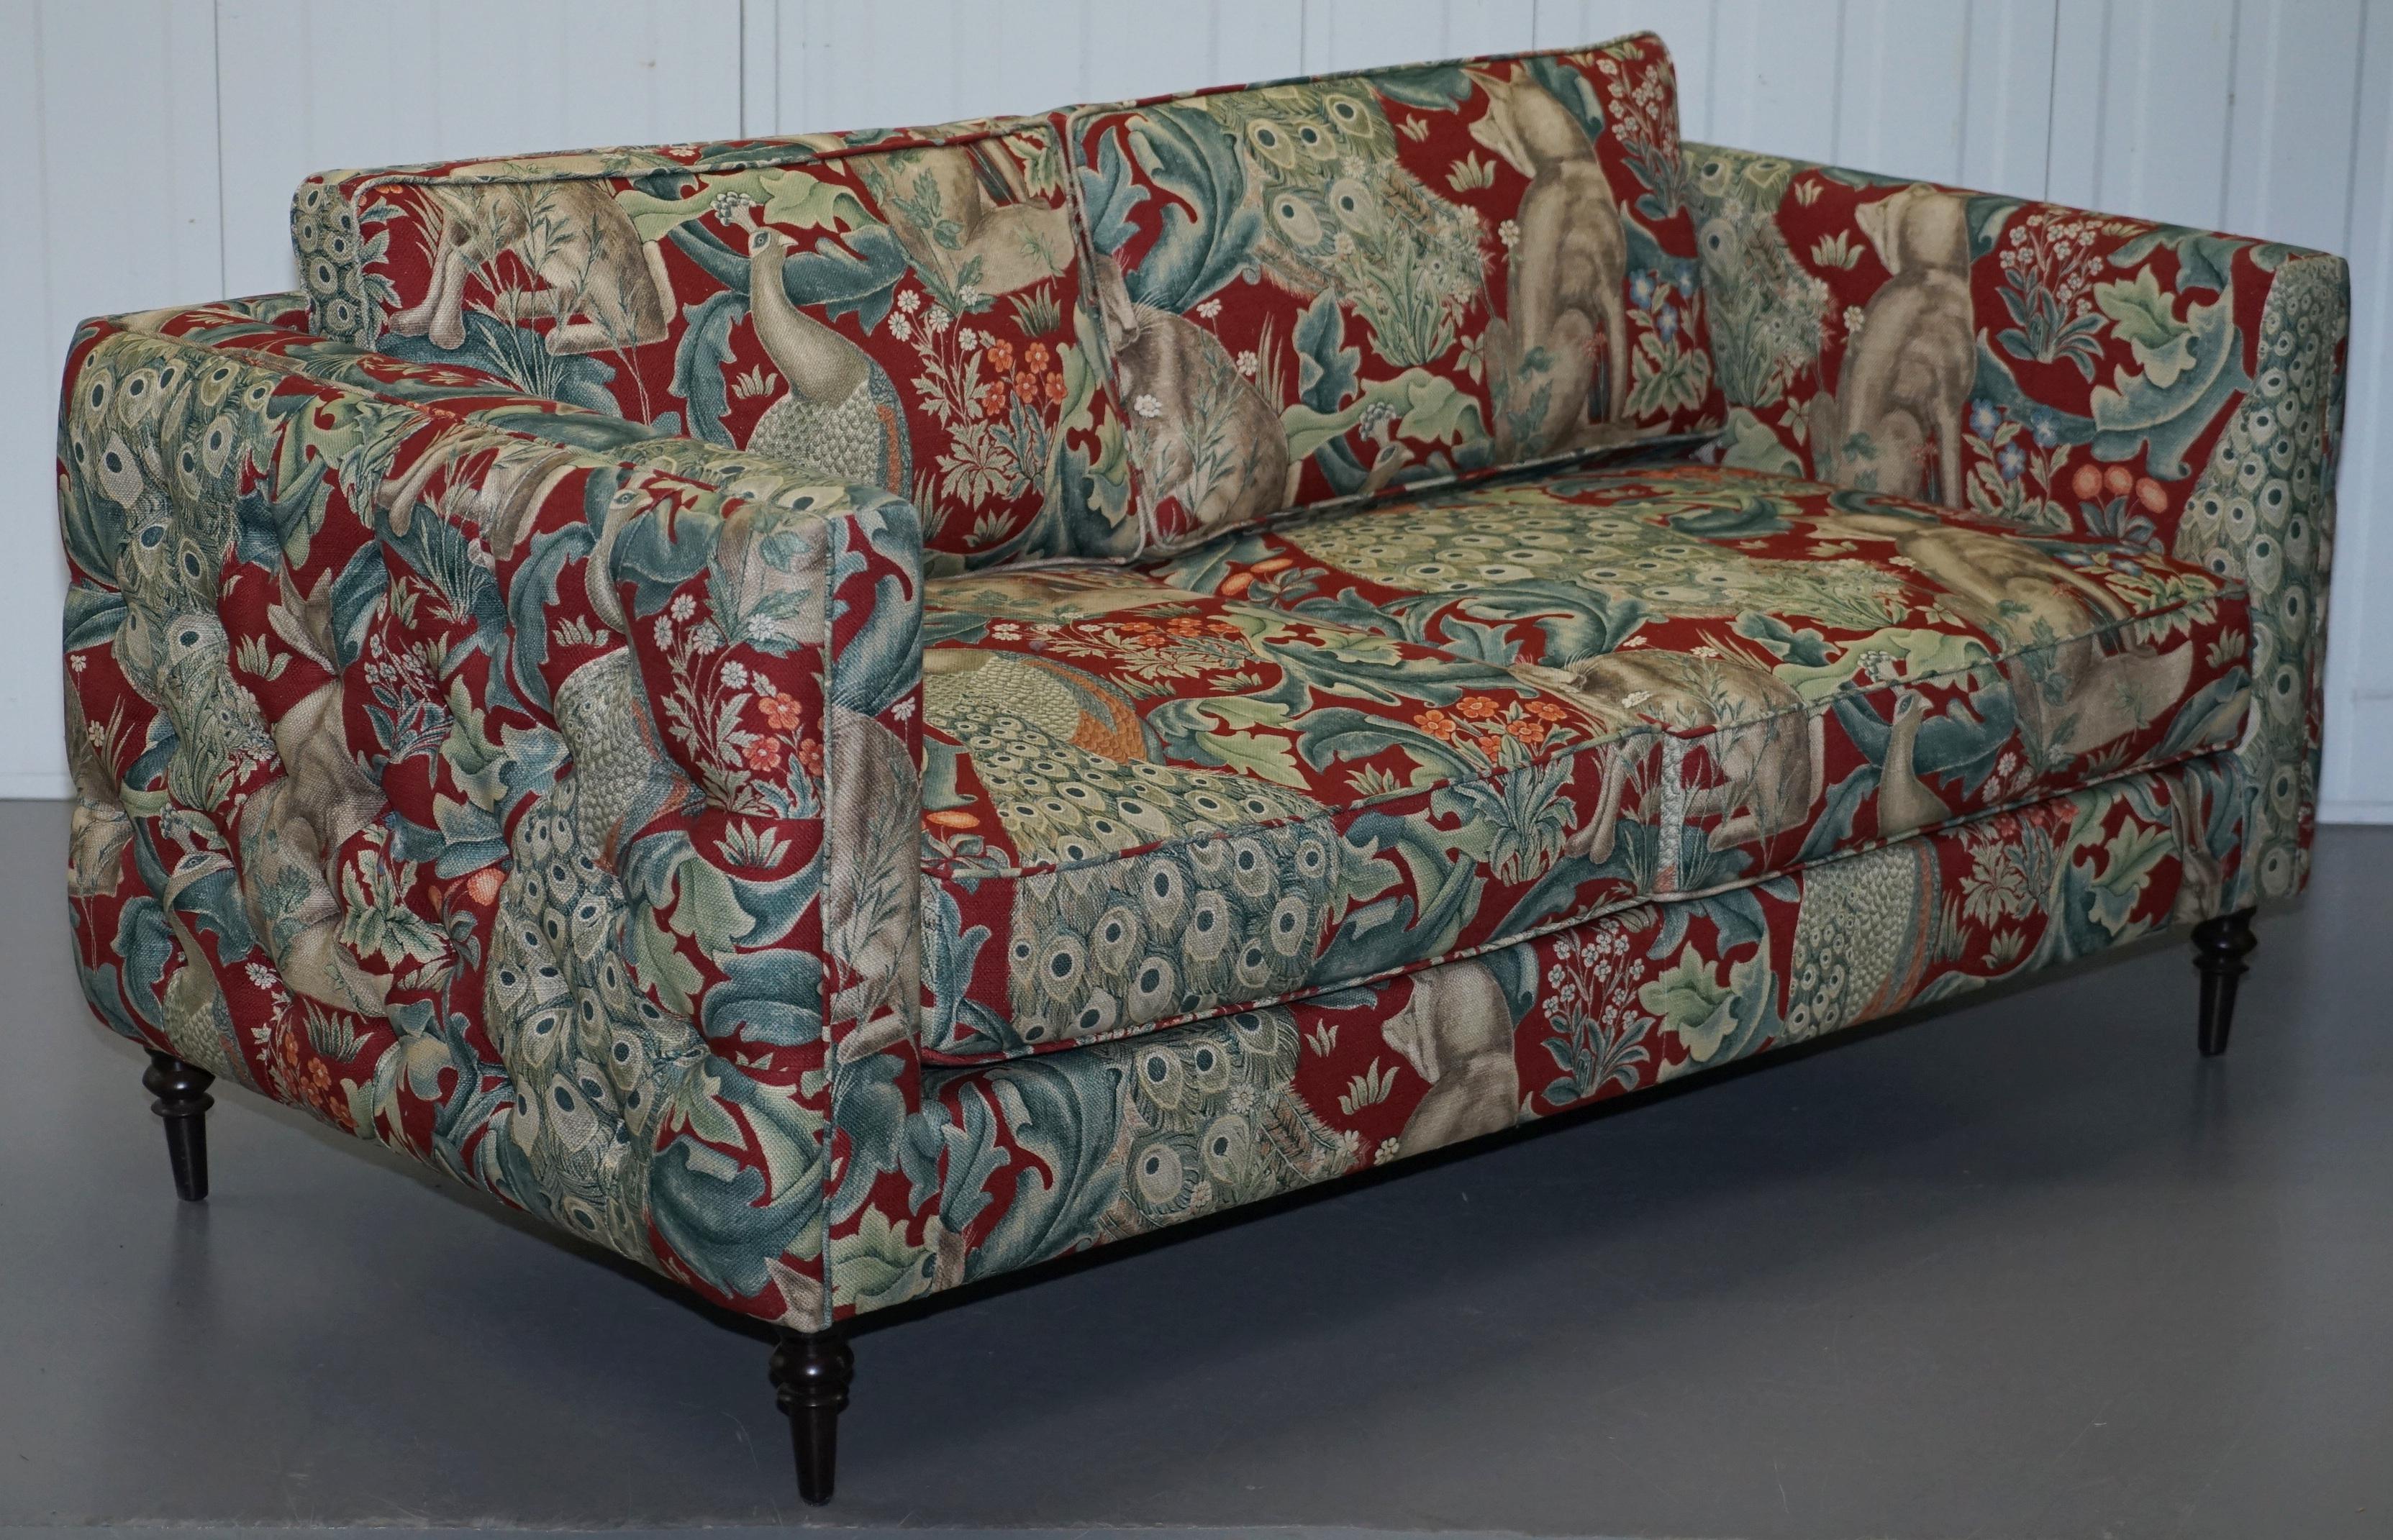 We are delighted to this absolutely stunning brand new William Morris forest Linen upholstered Chesterfield tufted sofa

This is without a doubt my absolutely favourite Morris fabric, it’s based on the original tapestry made in 1887 and is current